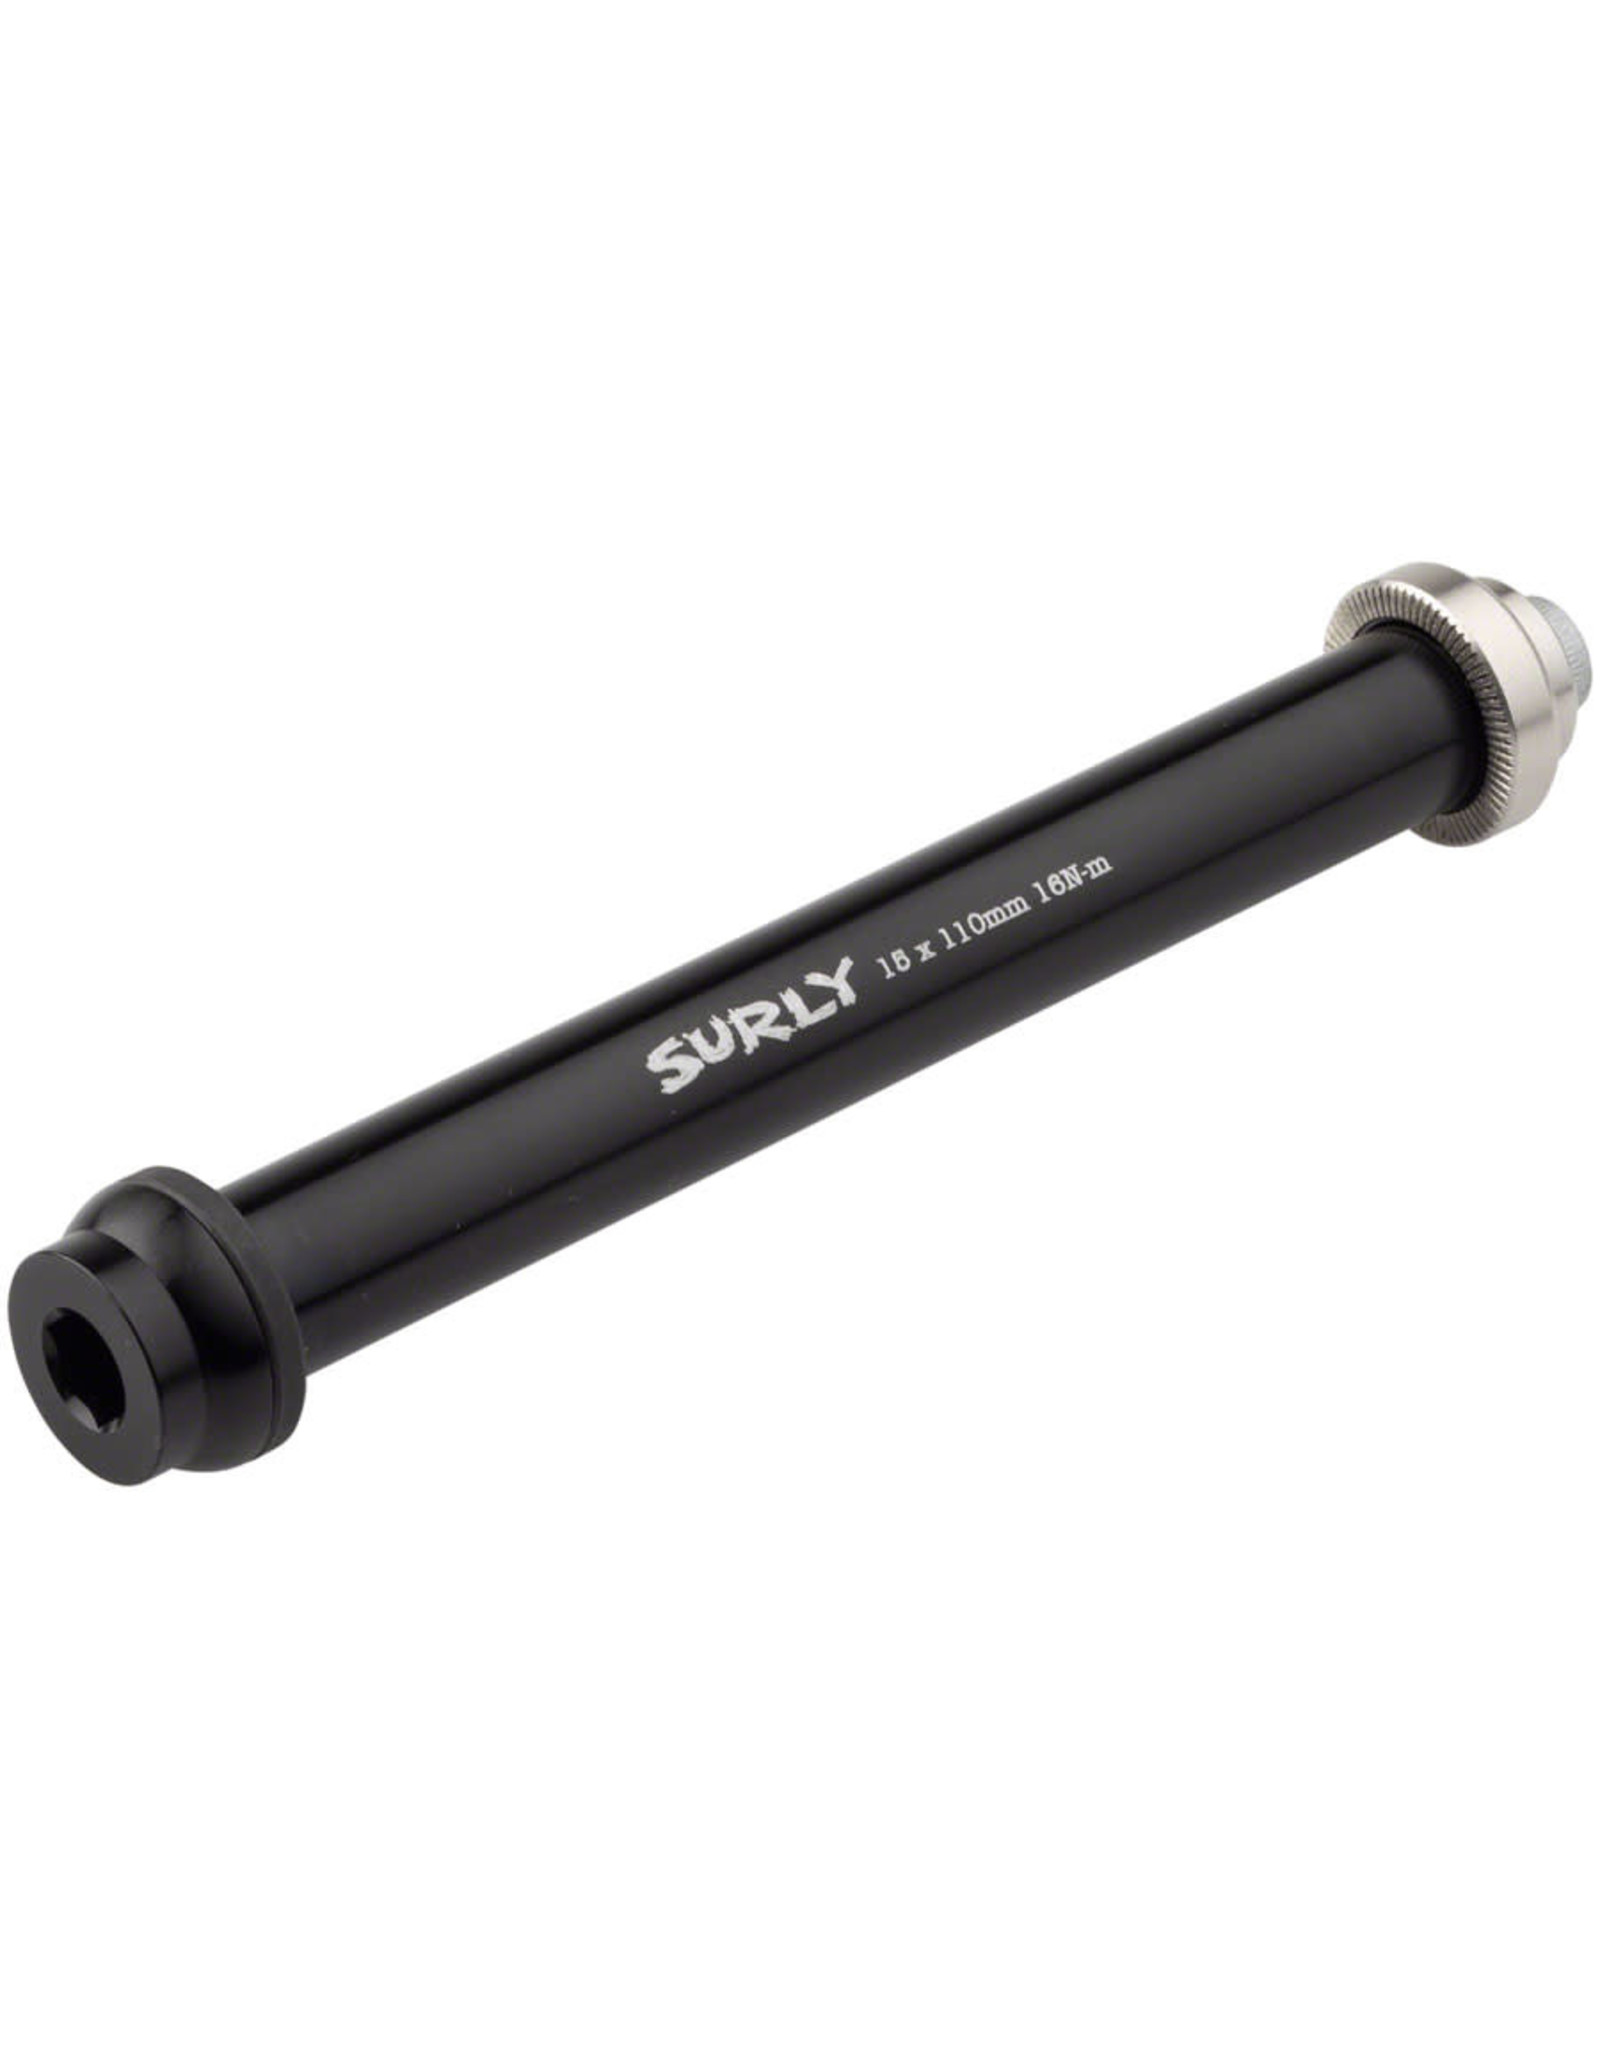 Surly Surly Front Thru-Axle - 15x110 mm Chromoly Black